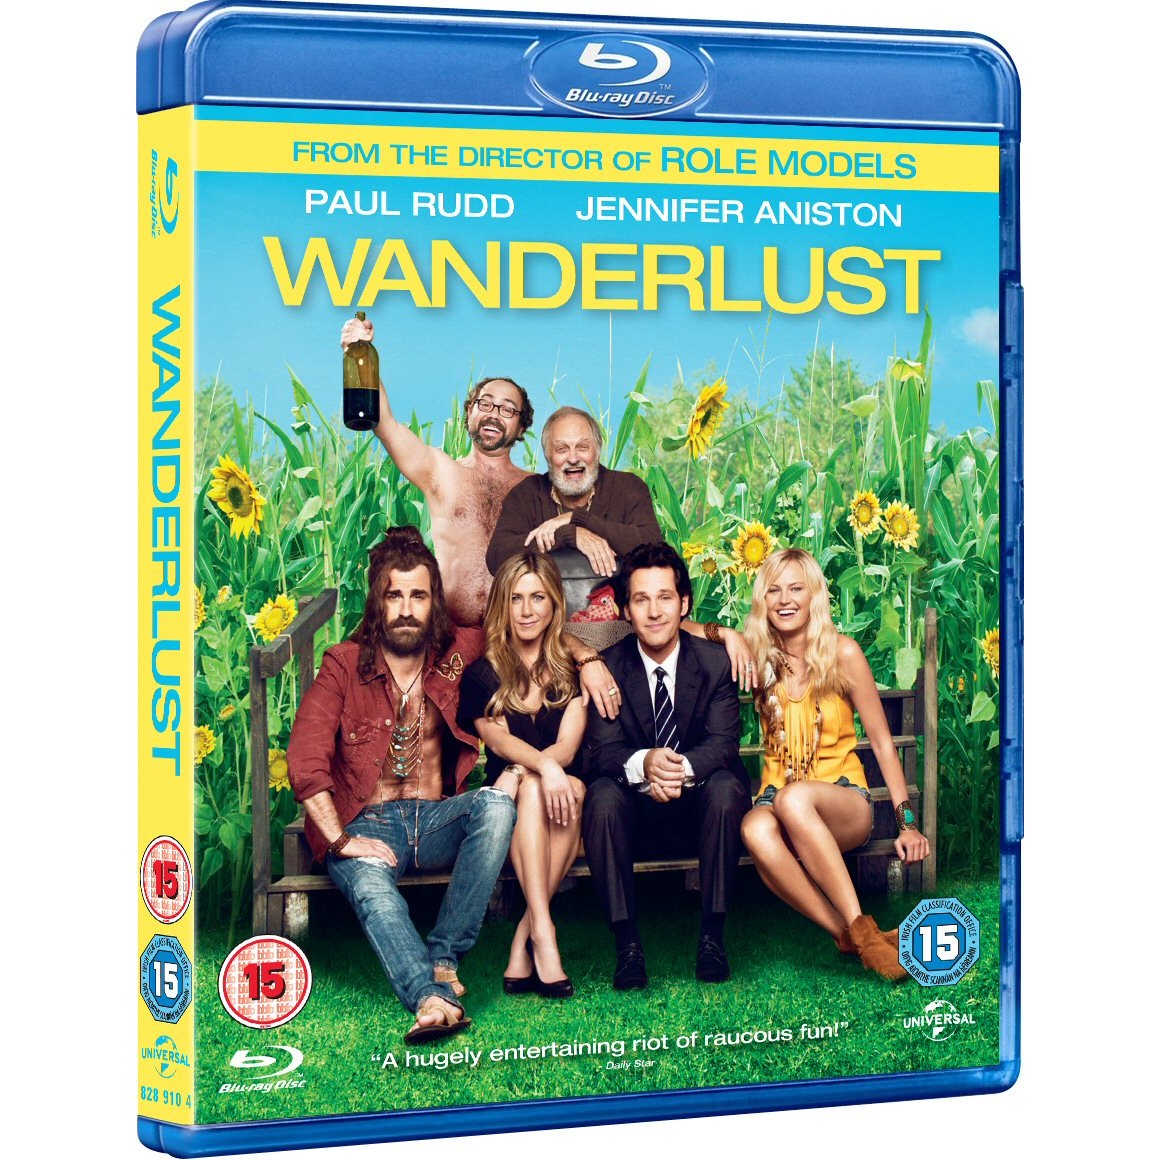 Wanderlust Available on Blu-ray/DVD 6/19/12